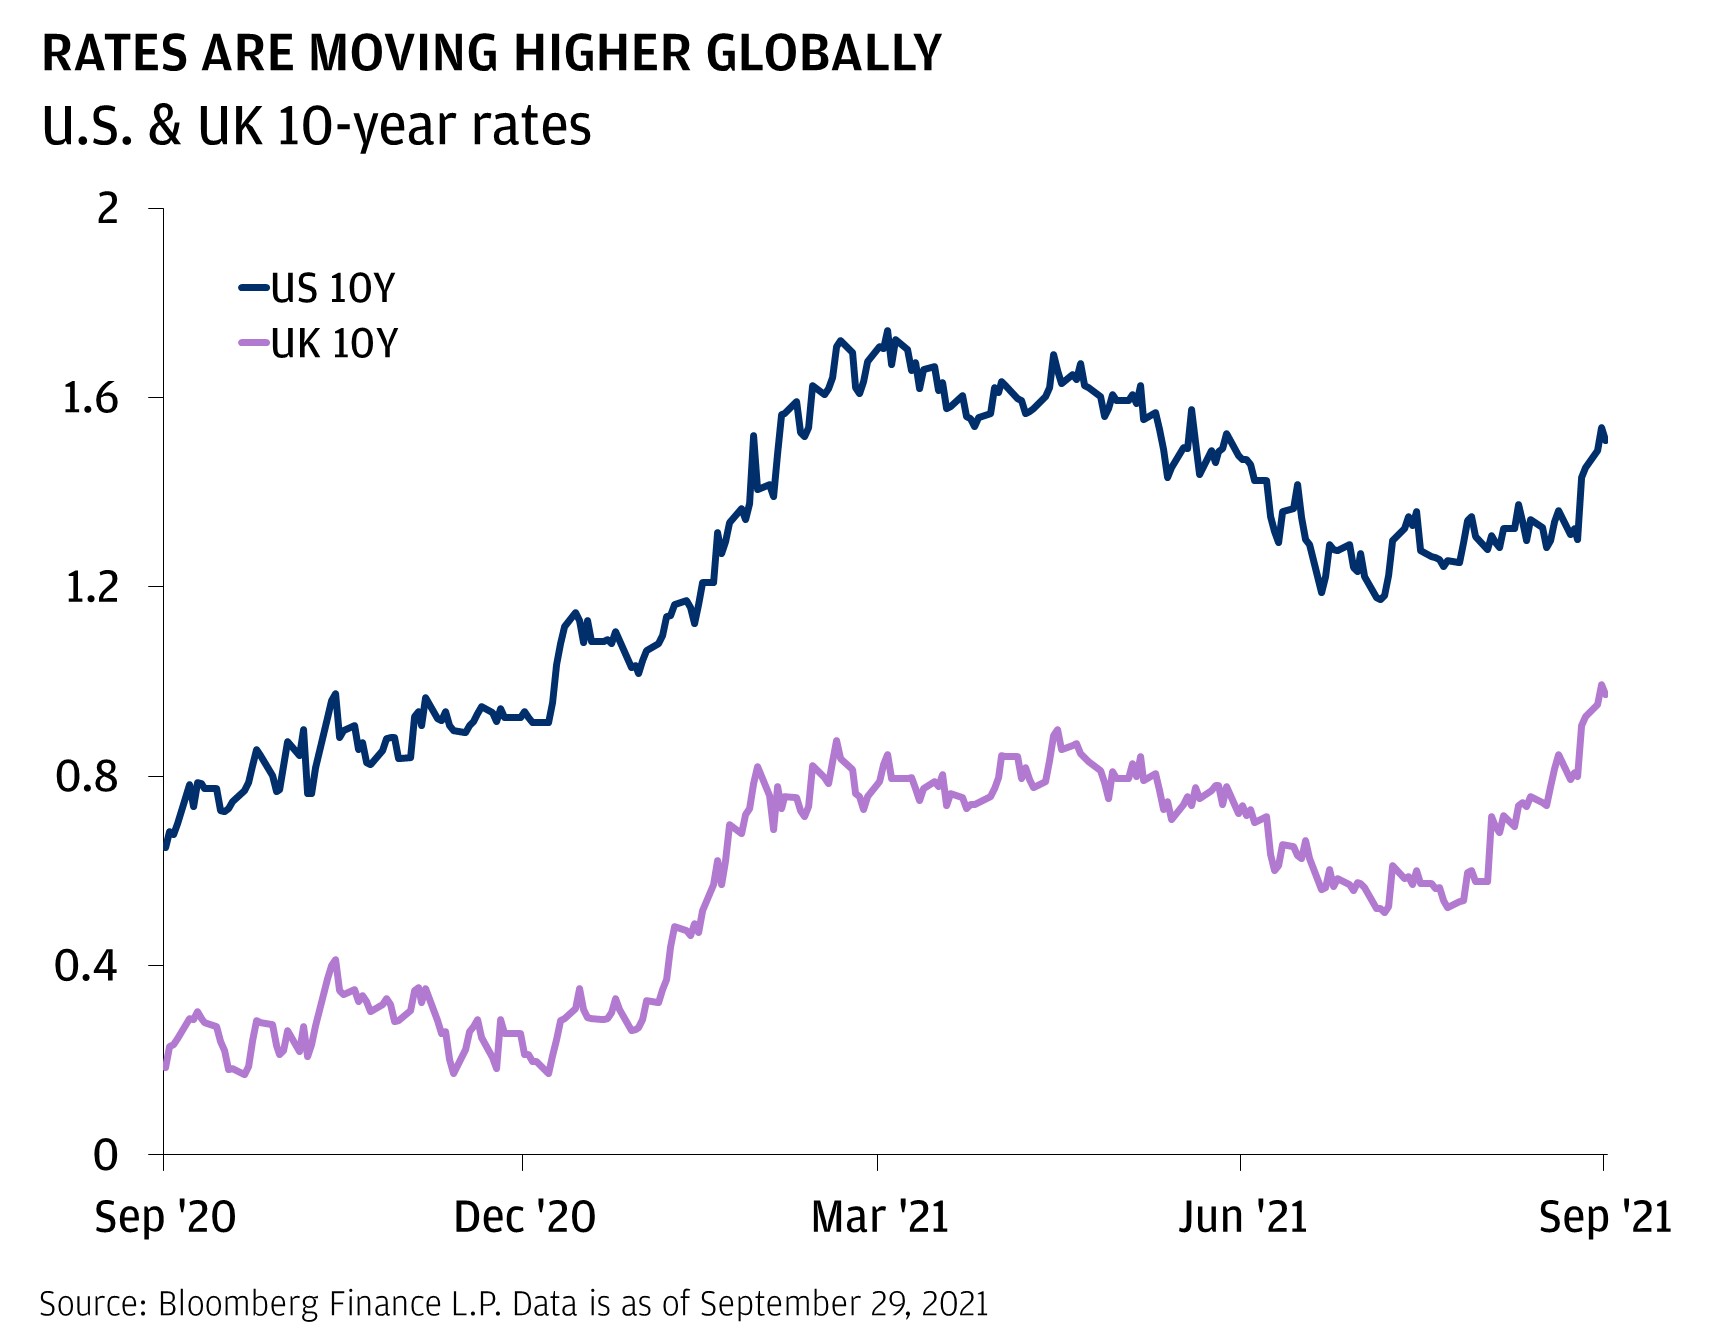 Rates are moving higher globally